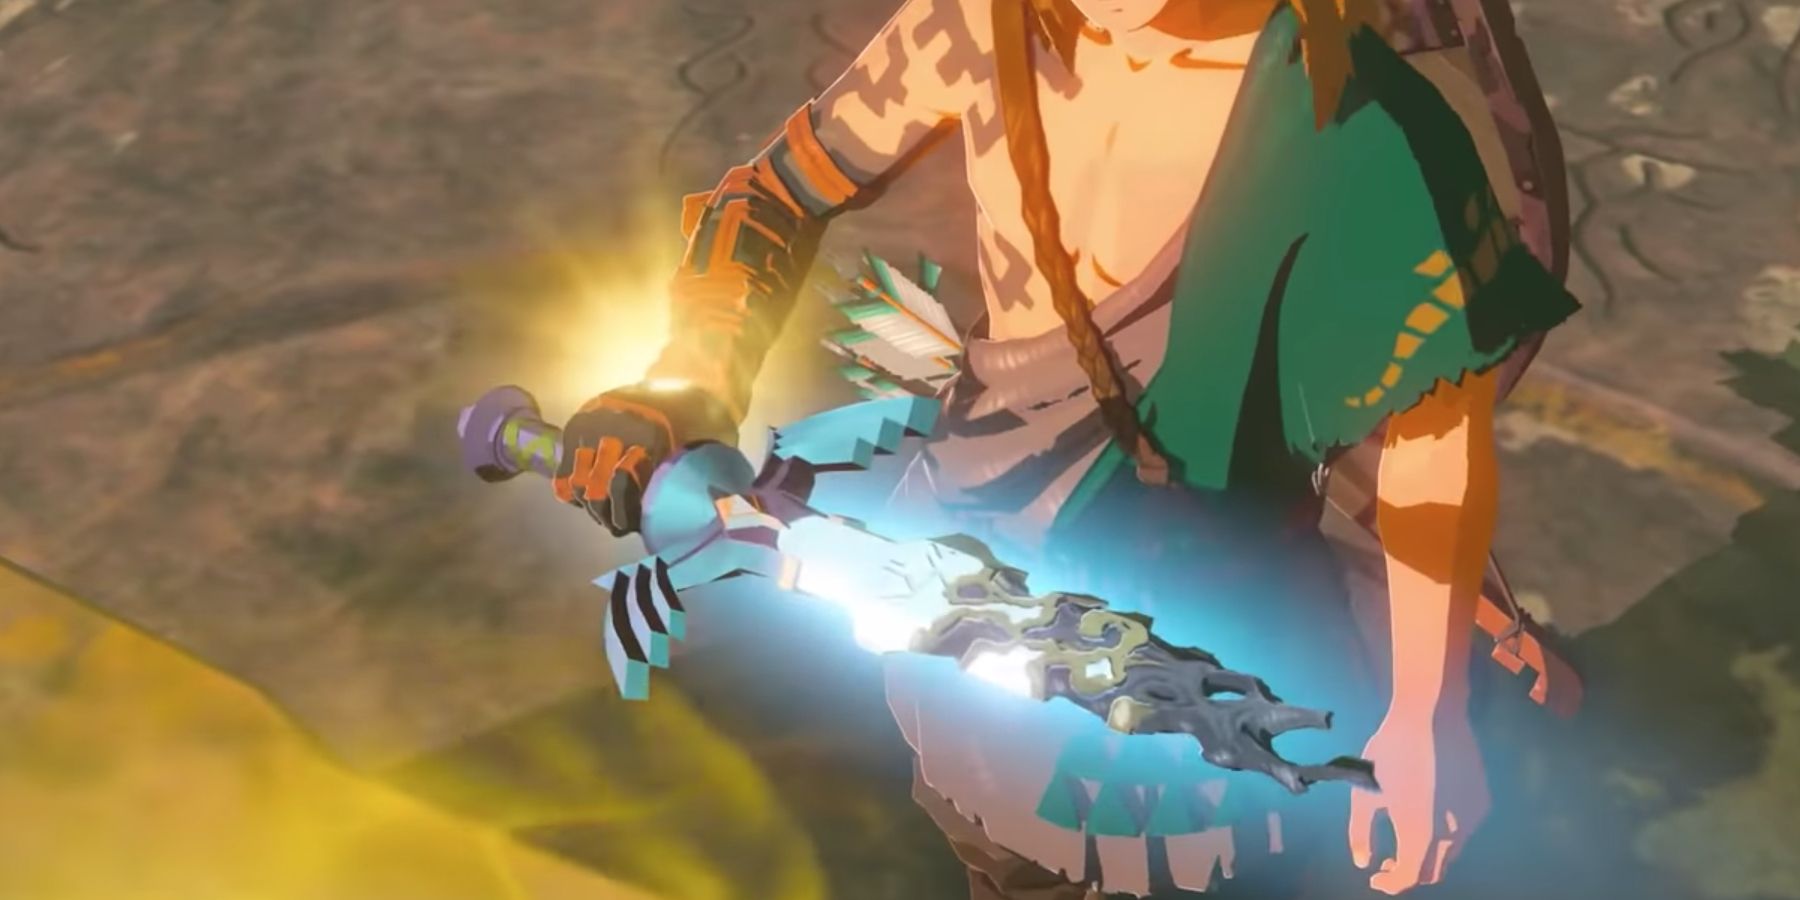 breath-of-the-wild-2-master-sword-from-update-trailer